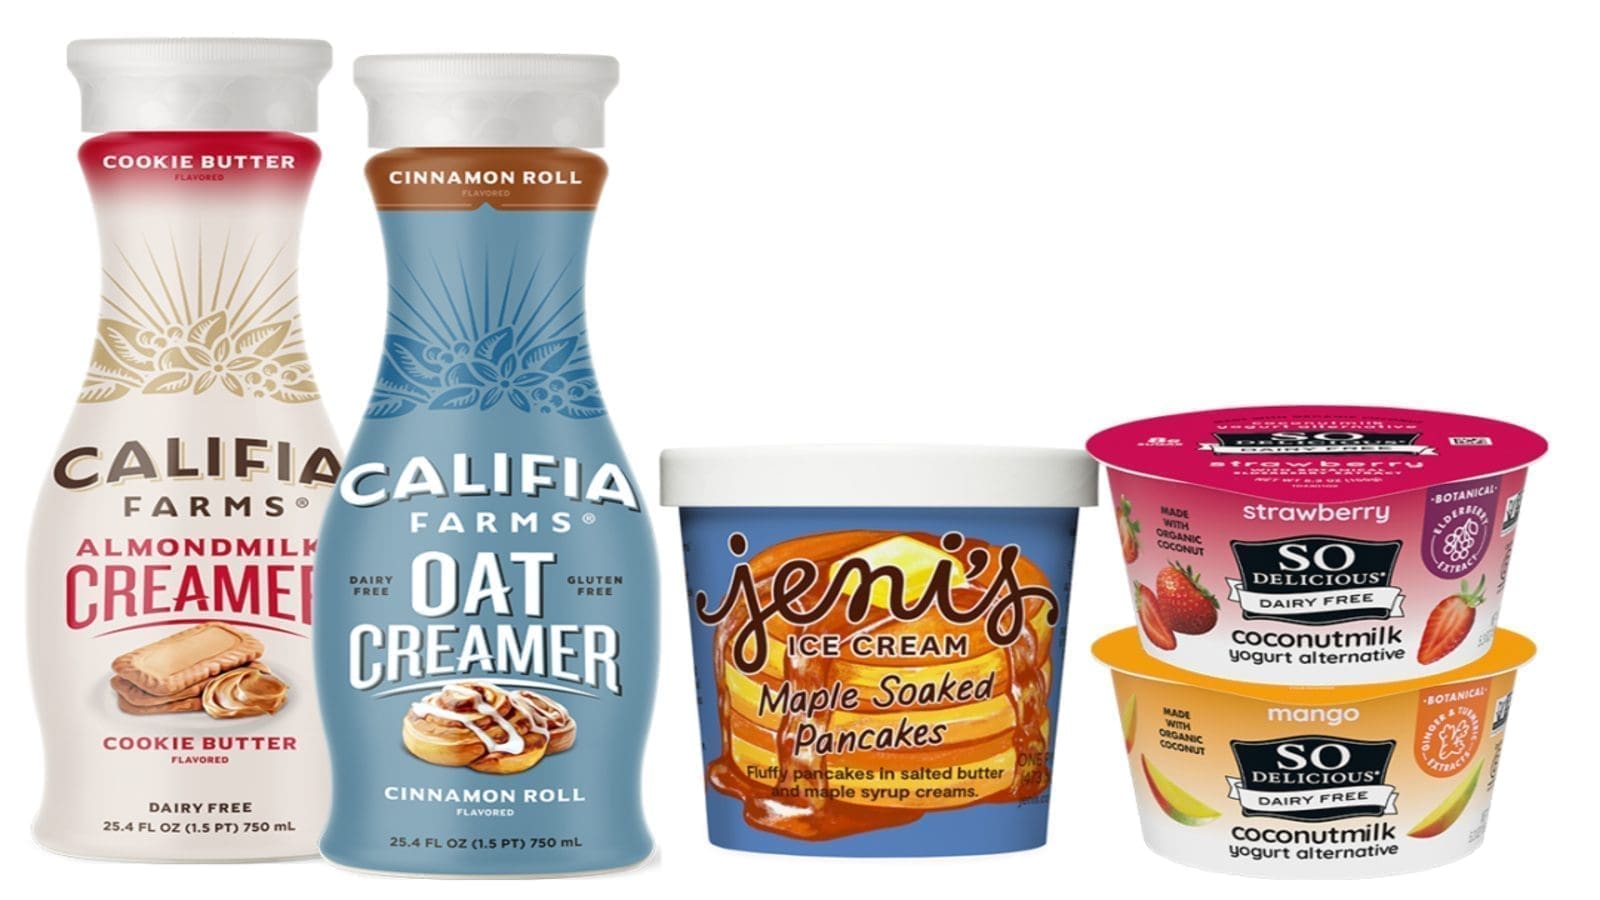 Dairy Innovation Monday: New products from Danone, Unilever, Jenis Splendid Ice Cream, & Califia Farms 